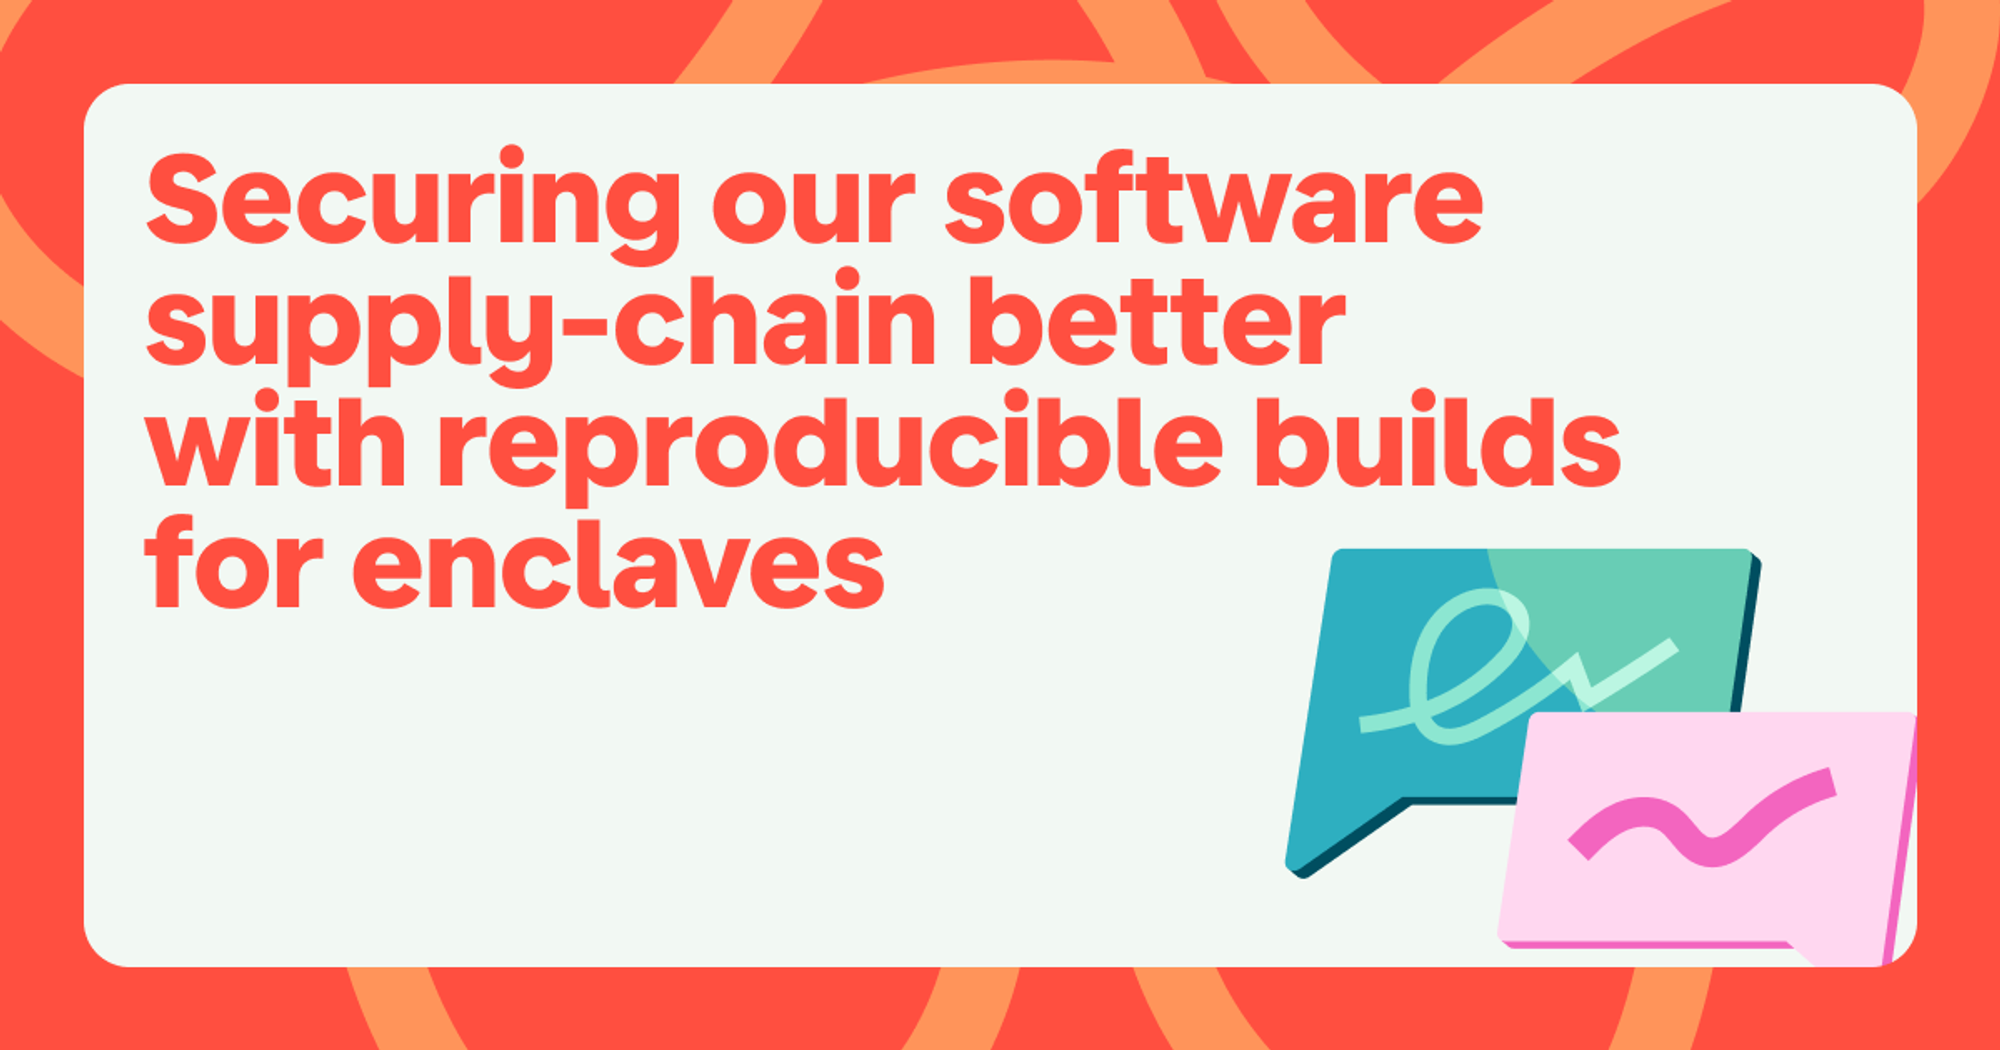 Image of the title: Securing our software supply-chain better with reproducible builds for enclaves. The image has a bright coral border. 